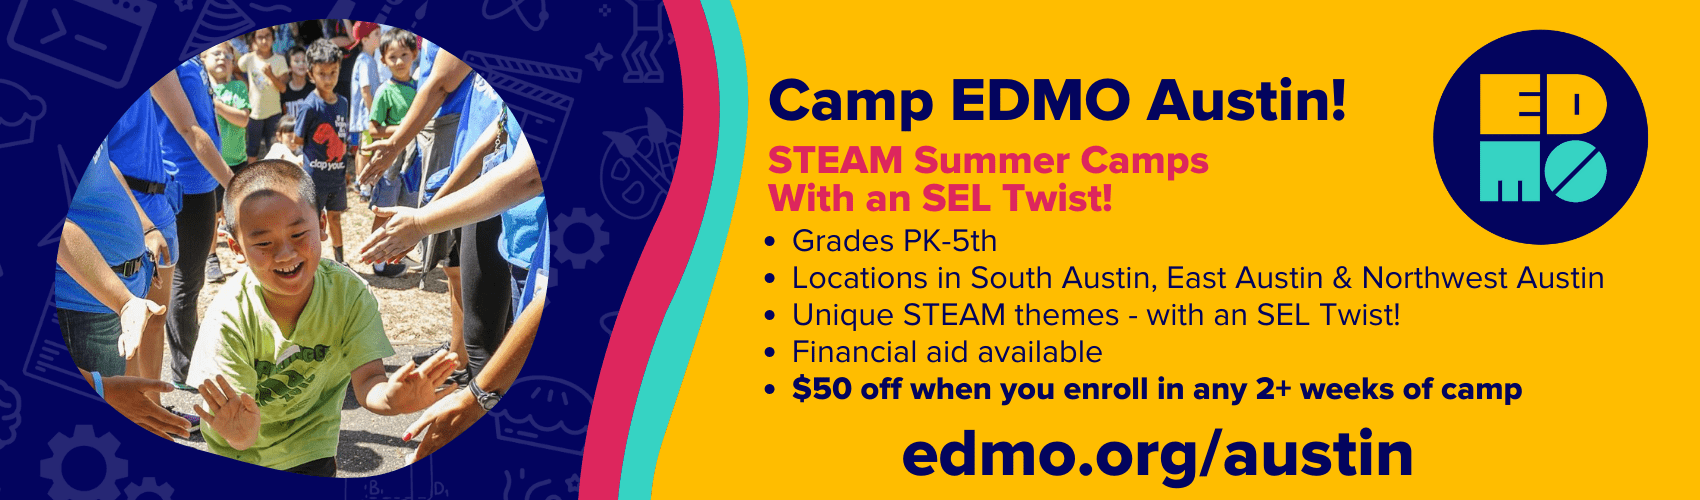 Camp EDMO STEAM Summer Camps with an SEL Twist Do512 Family